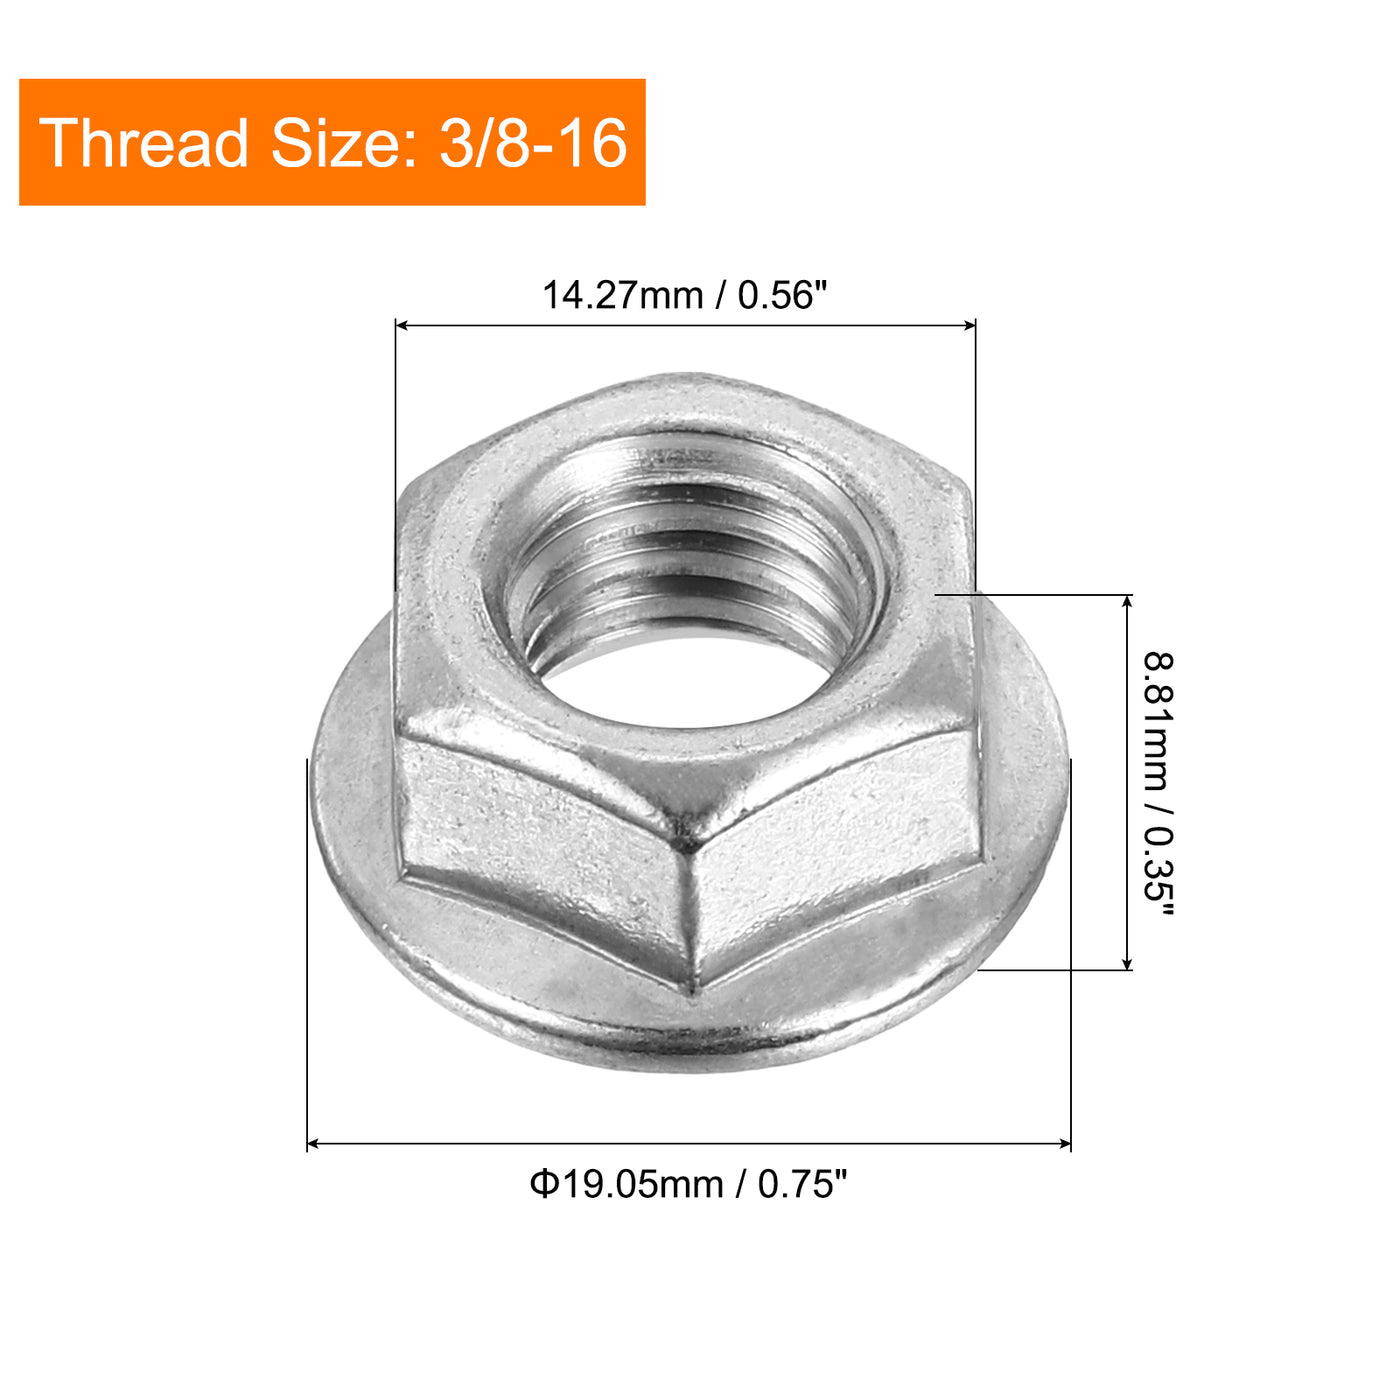 uxcell Uxcell 3/8-16 Serrated Flange Hex Lock Nuts, 20Pcs Hexagon Flange Nut, Silver